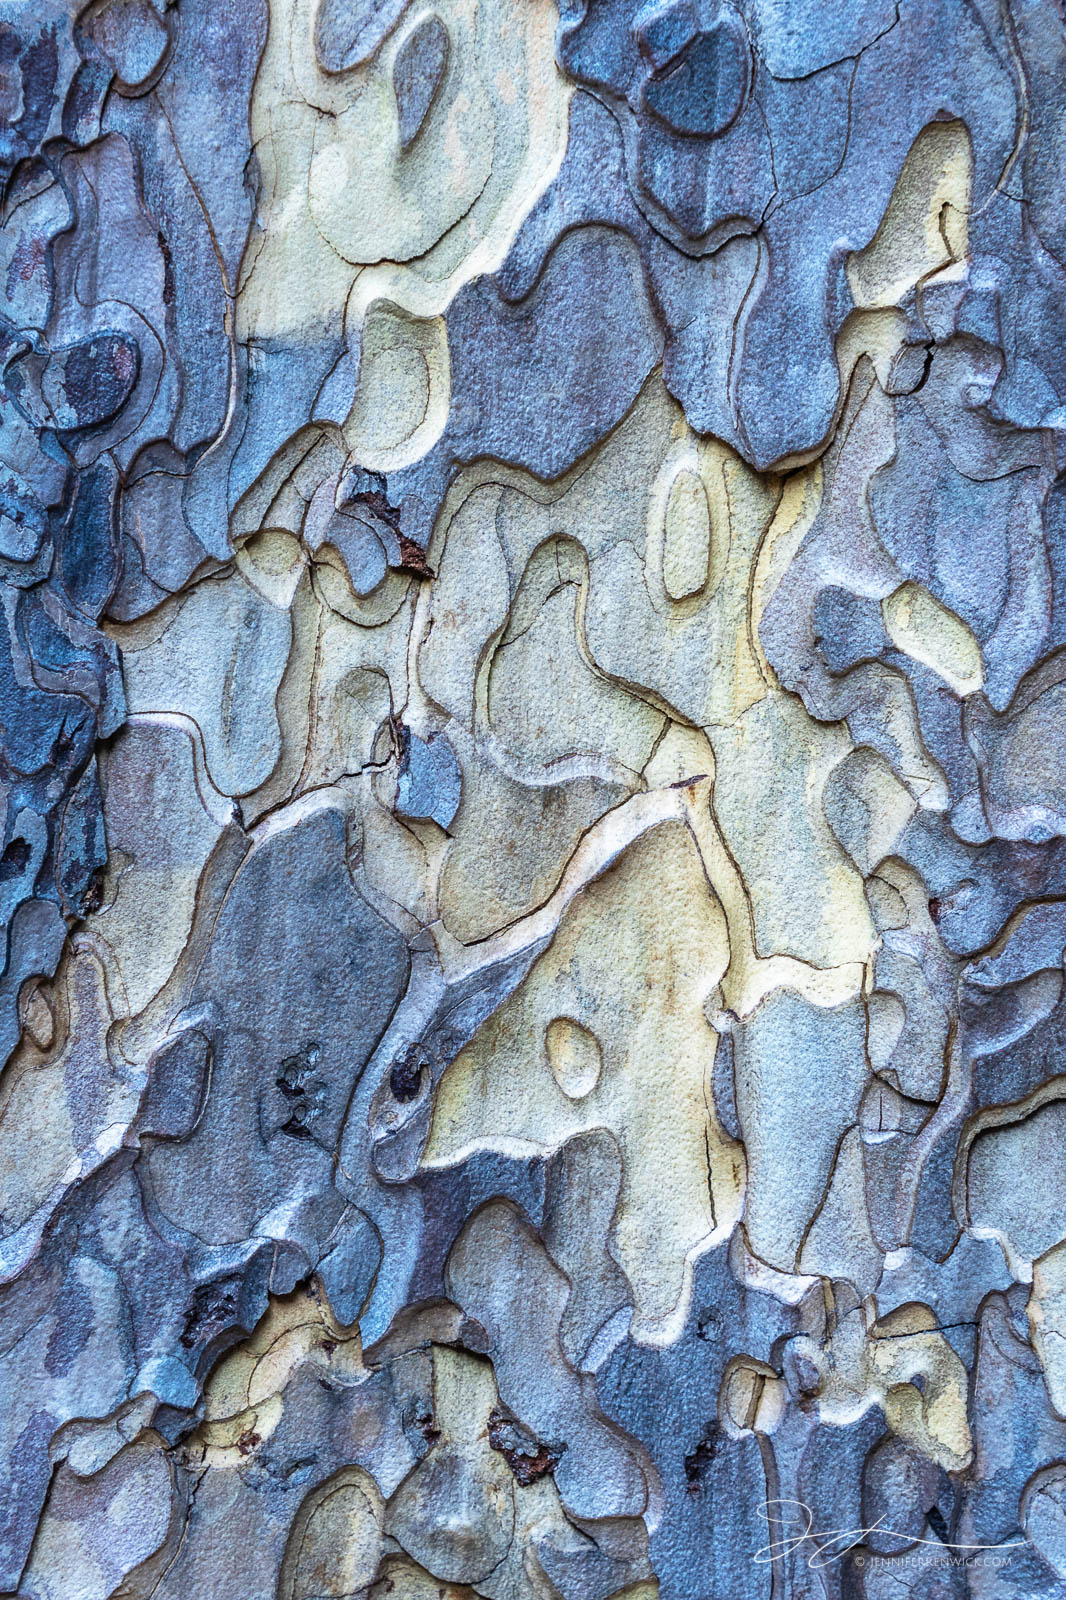 Ponderosa Bark catches the twilight glow during blue hour, highlighting a maze of texture and patterns.